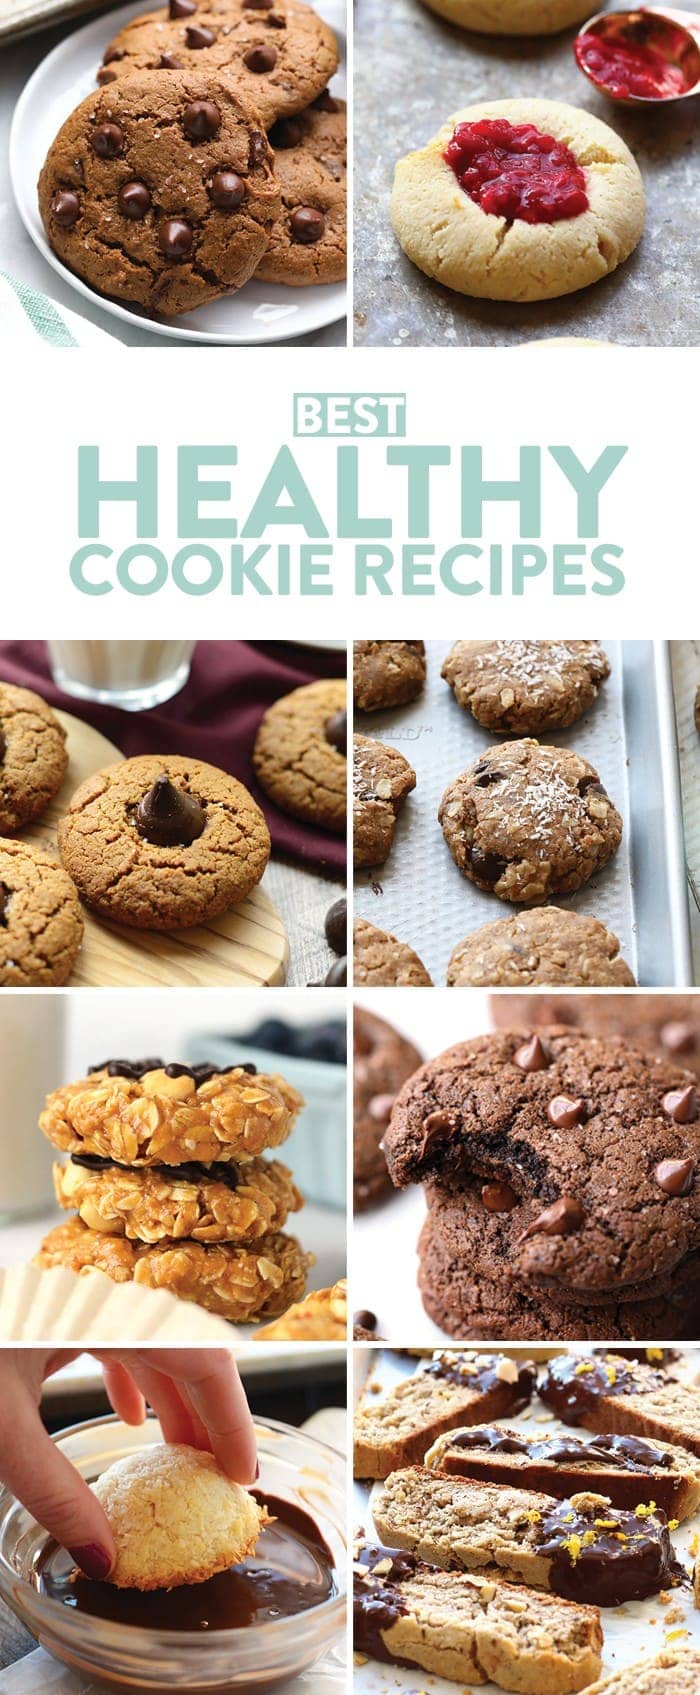 Healthy cookie recipes